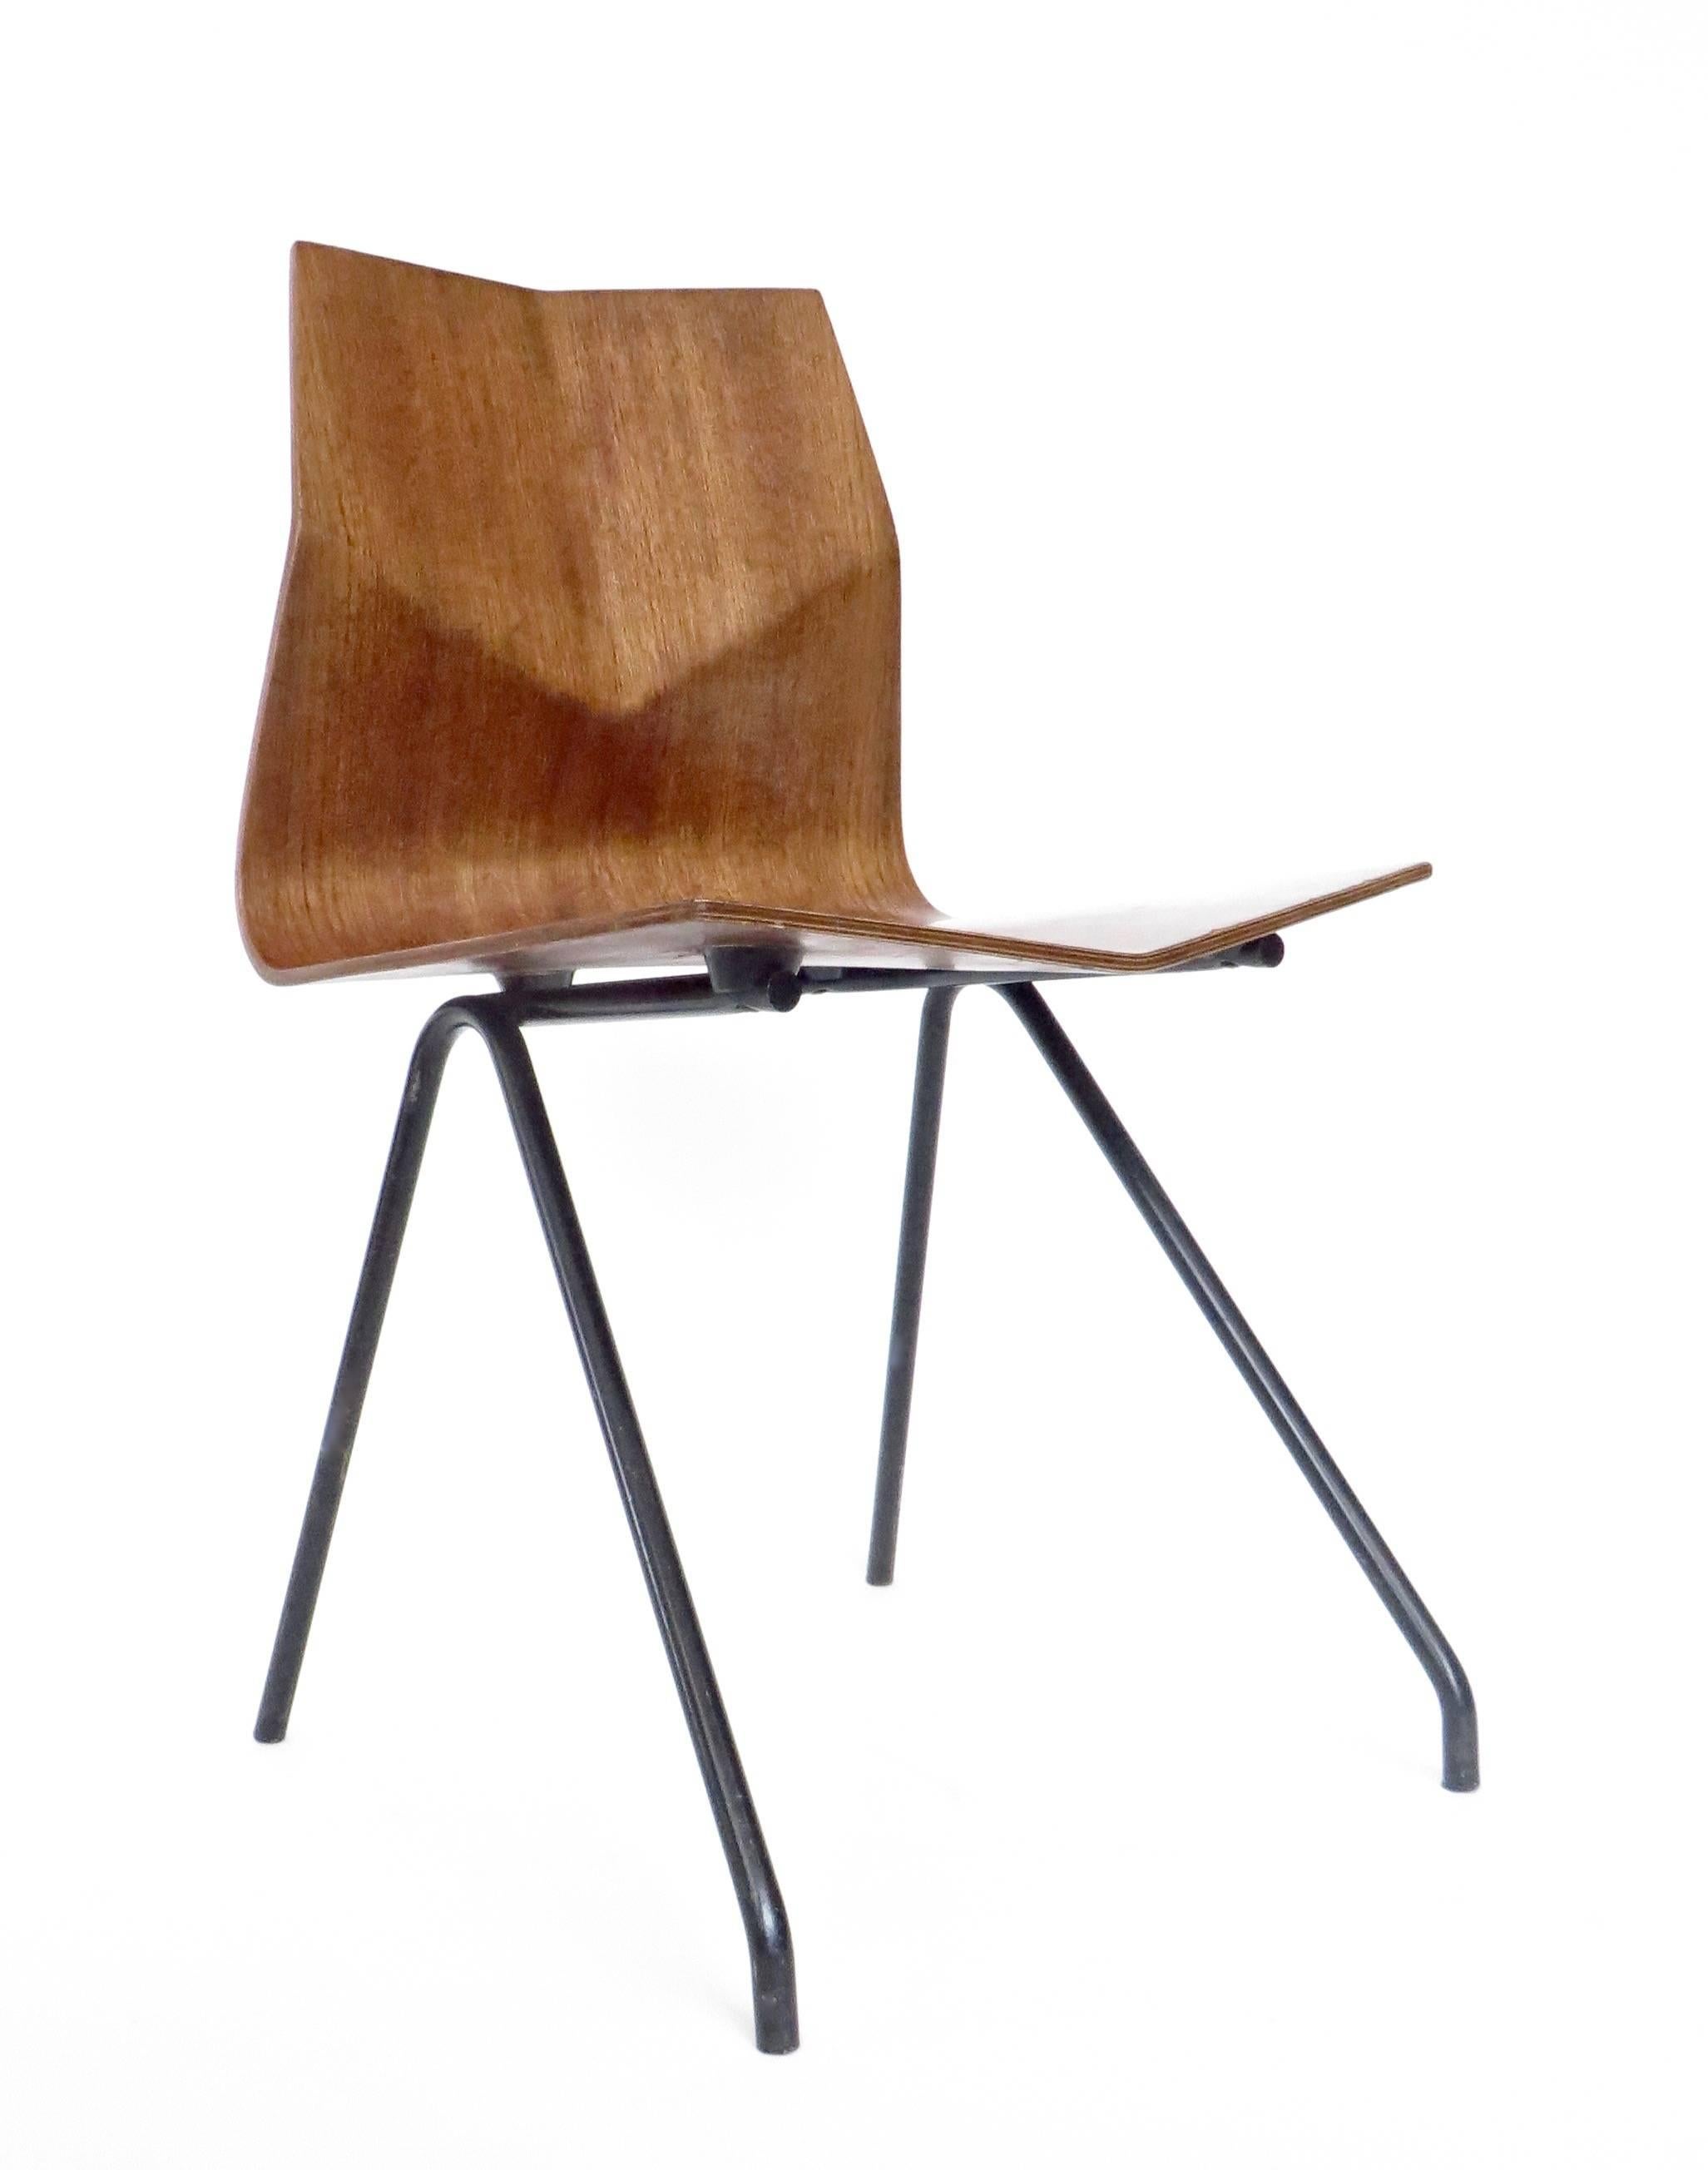 A single Rene Jean Caillette French circa 1958 Diamant diamond molded teak plywood with black metal legs desk or dining hair. 
A signature piece by Rene Jean Caillette. 
Edition Steiner.
Chair: 17.5